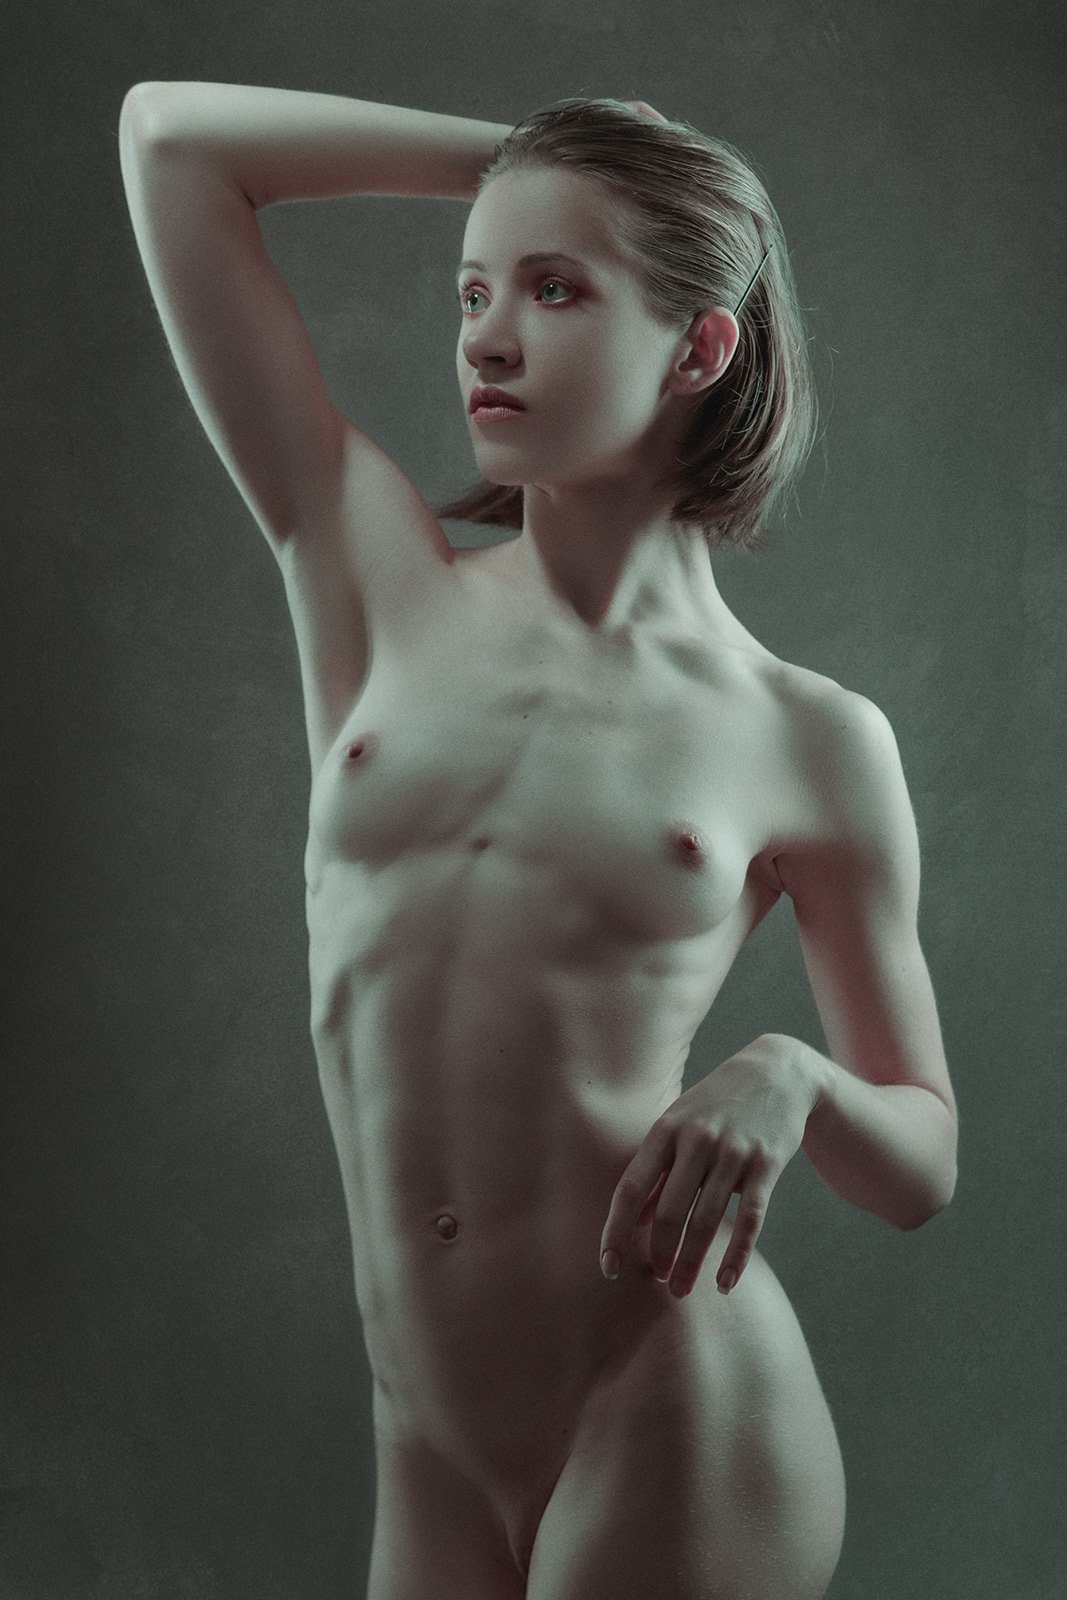 female, portrait, fine, art, nudes, photo, desire, motion, expression, nude, naked, marble, naked, woman, young, adult, face, body, beauty, Дмитрий Толоконов